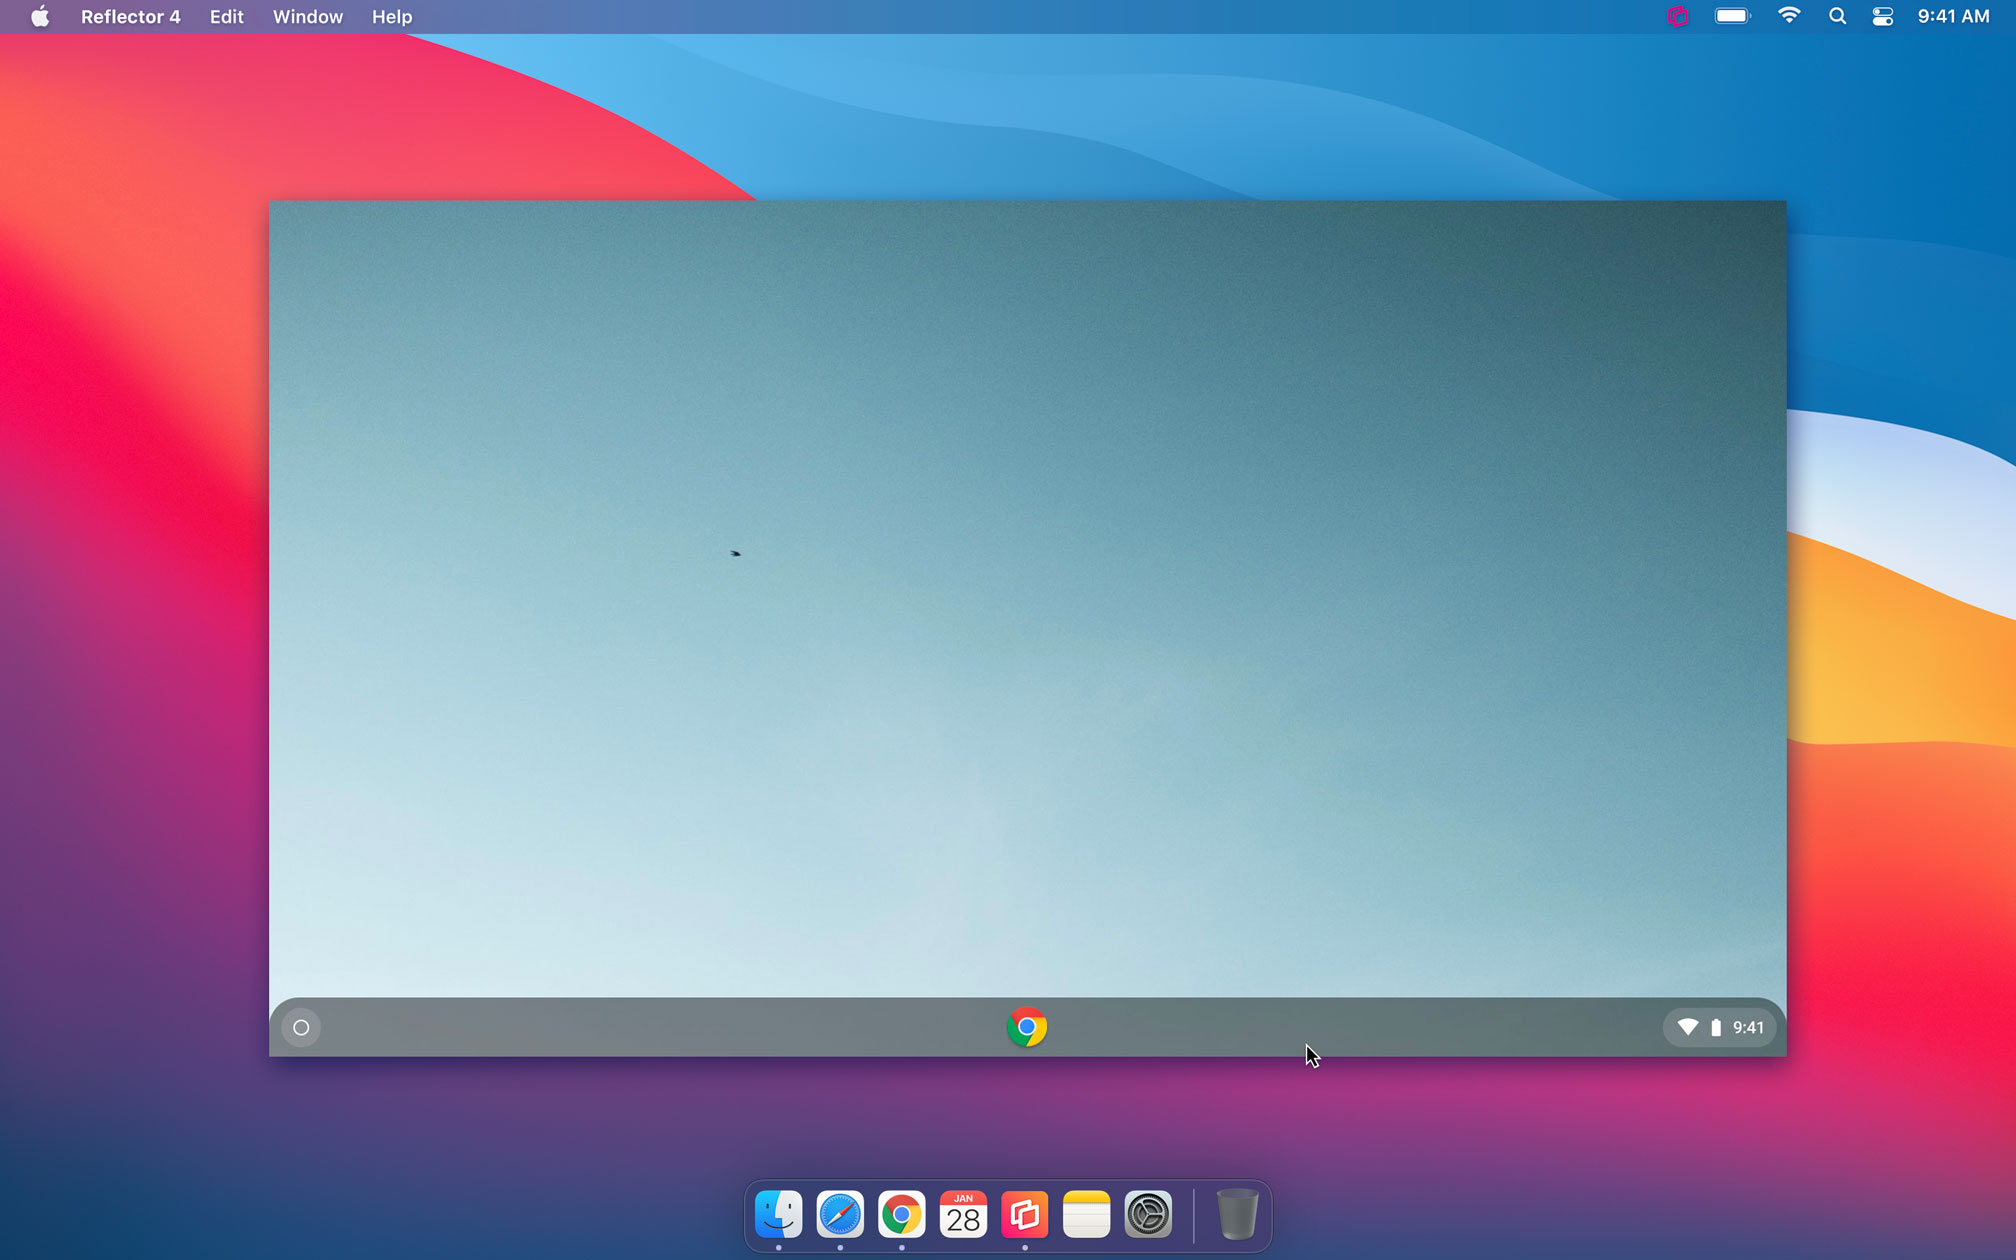 How To Wirelessly Mirror An Entire Chromebook Display to Apple TV or Reflector - Featured Image